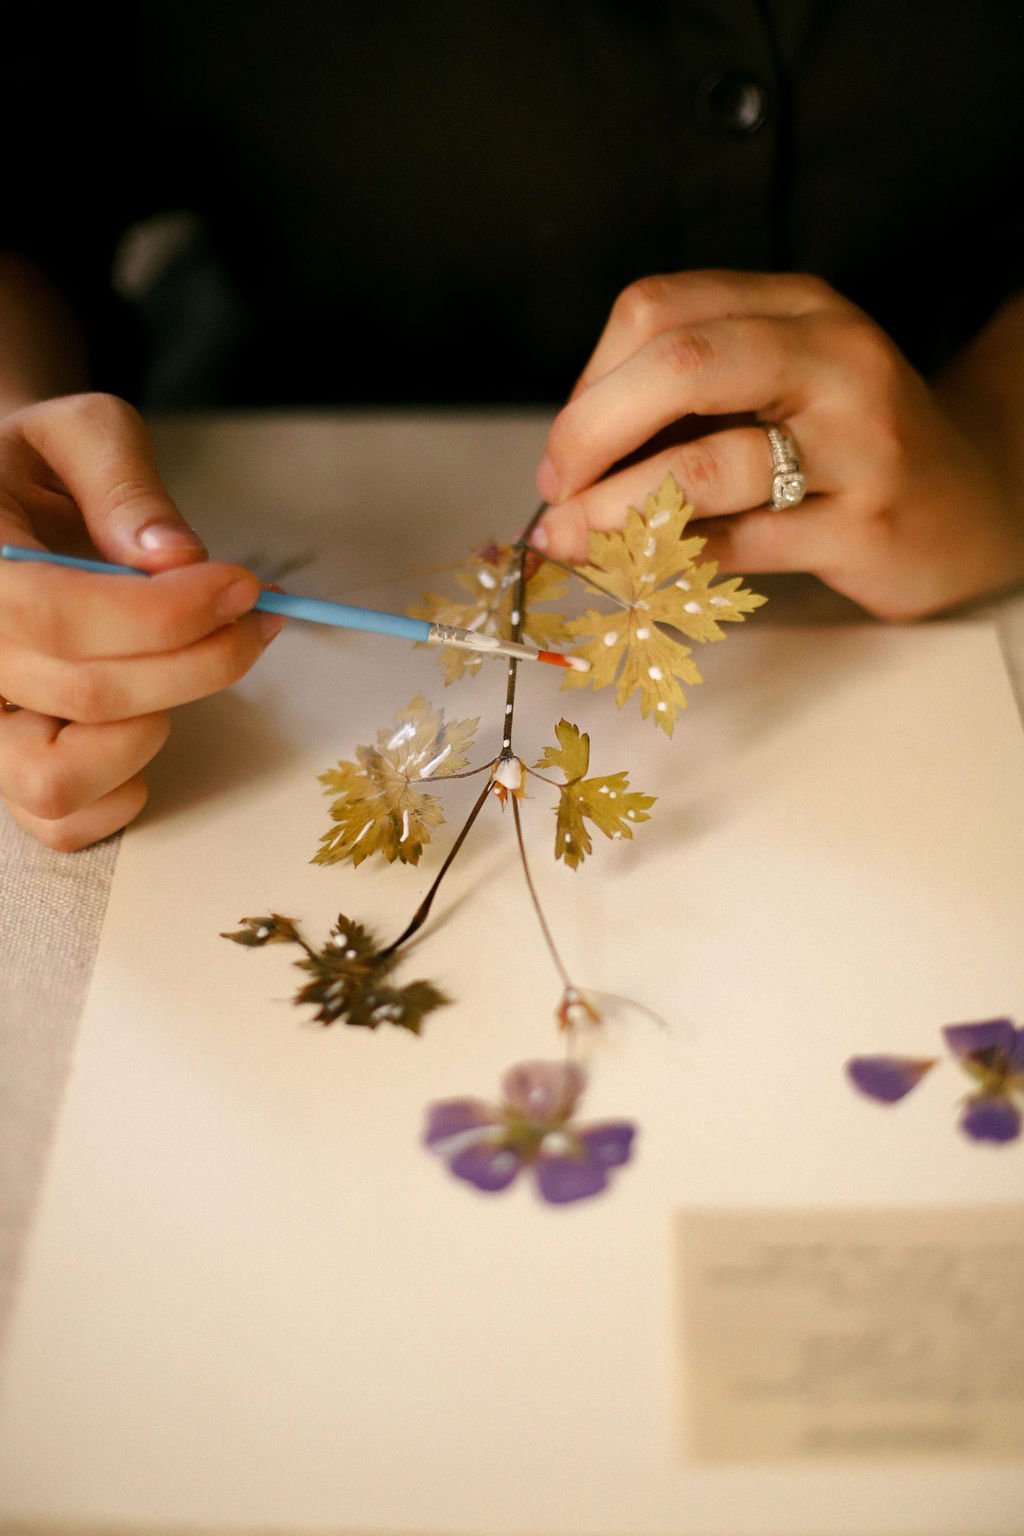 Still life: how to press flowers for your own collection - The